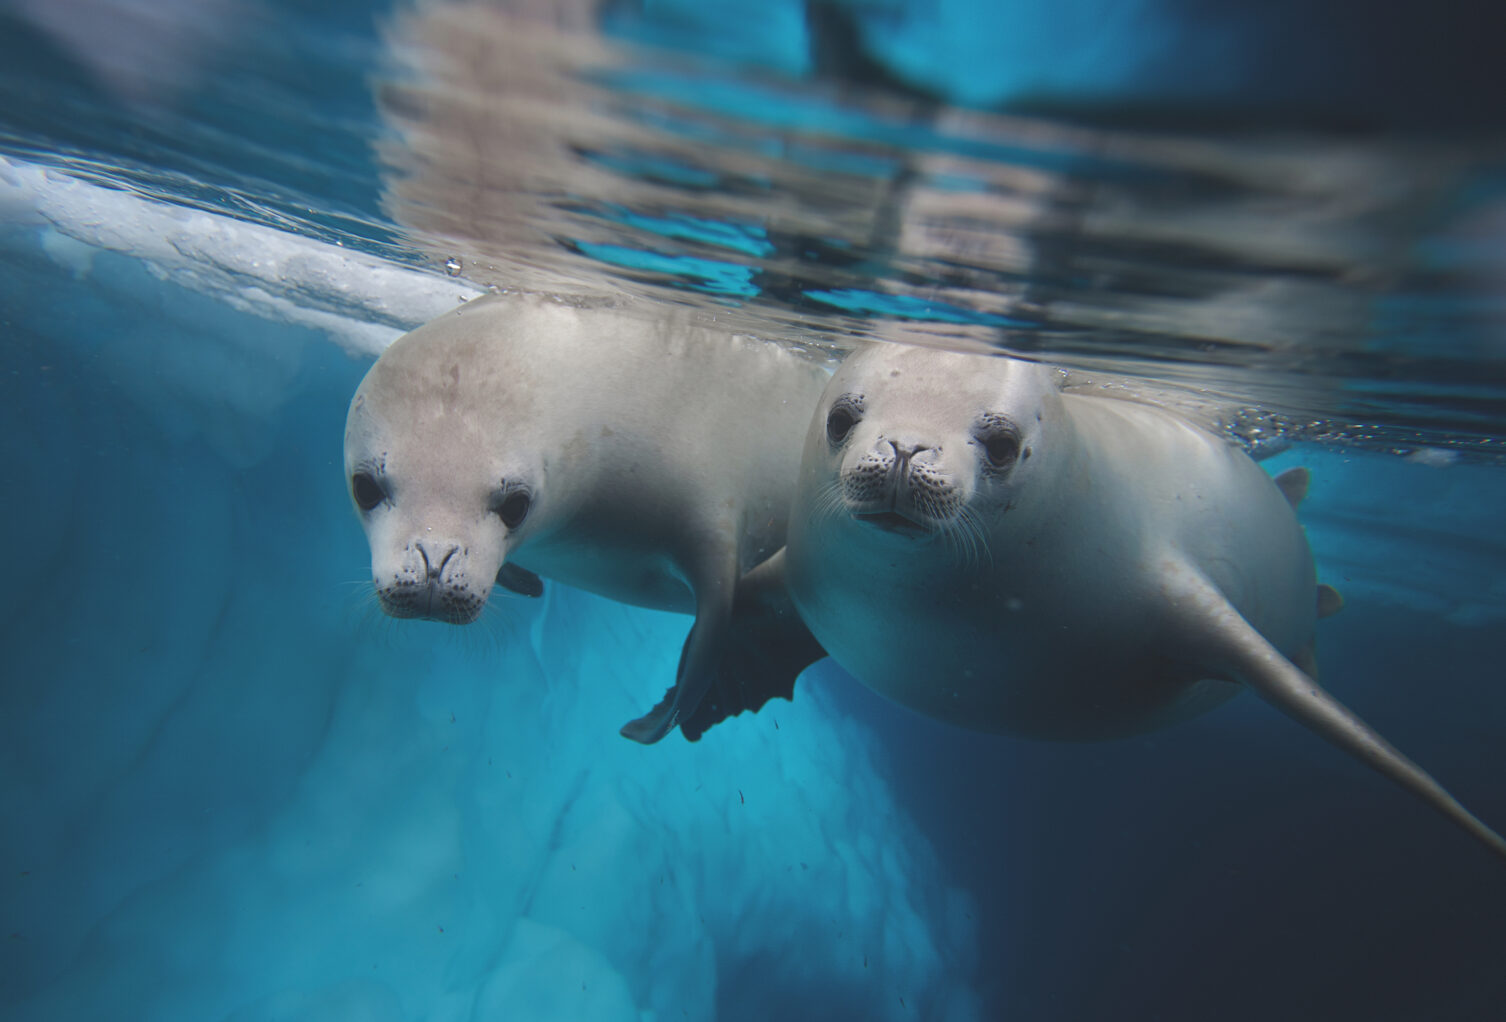 Two seals in the chilly waters of Antarctica